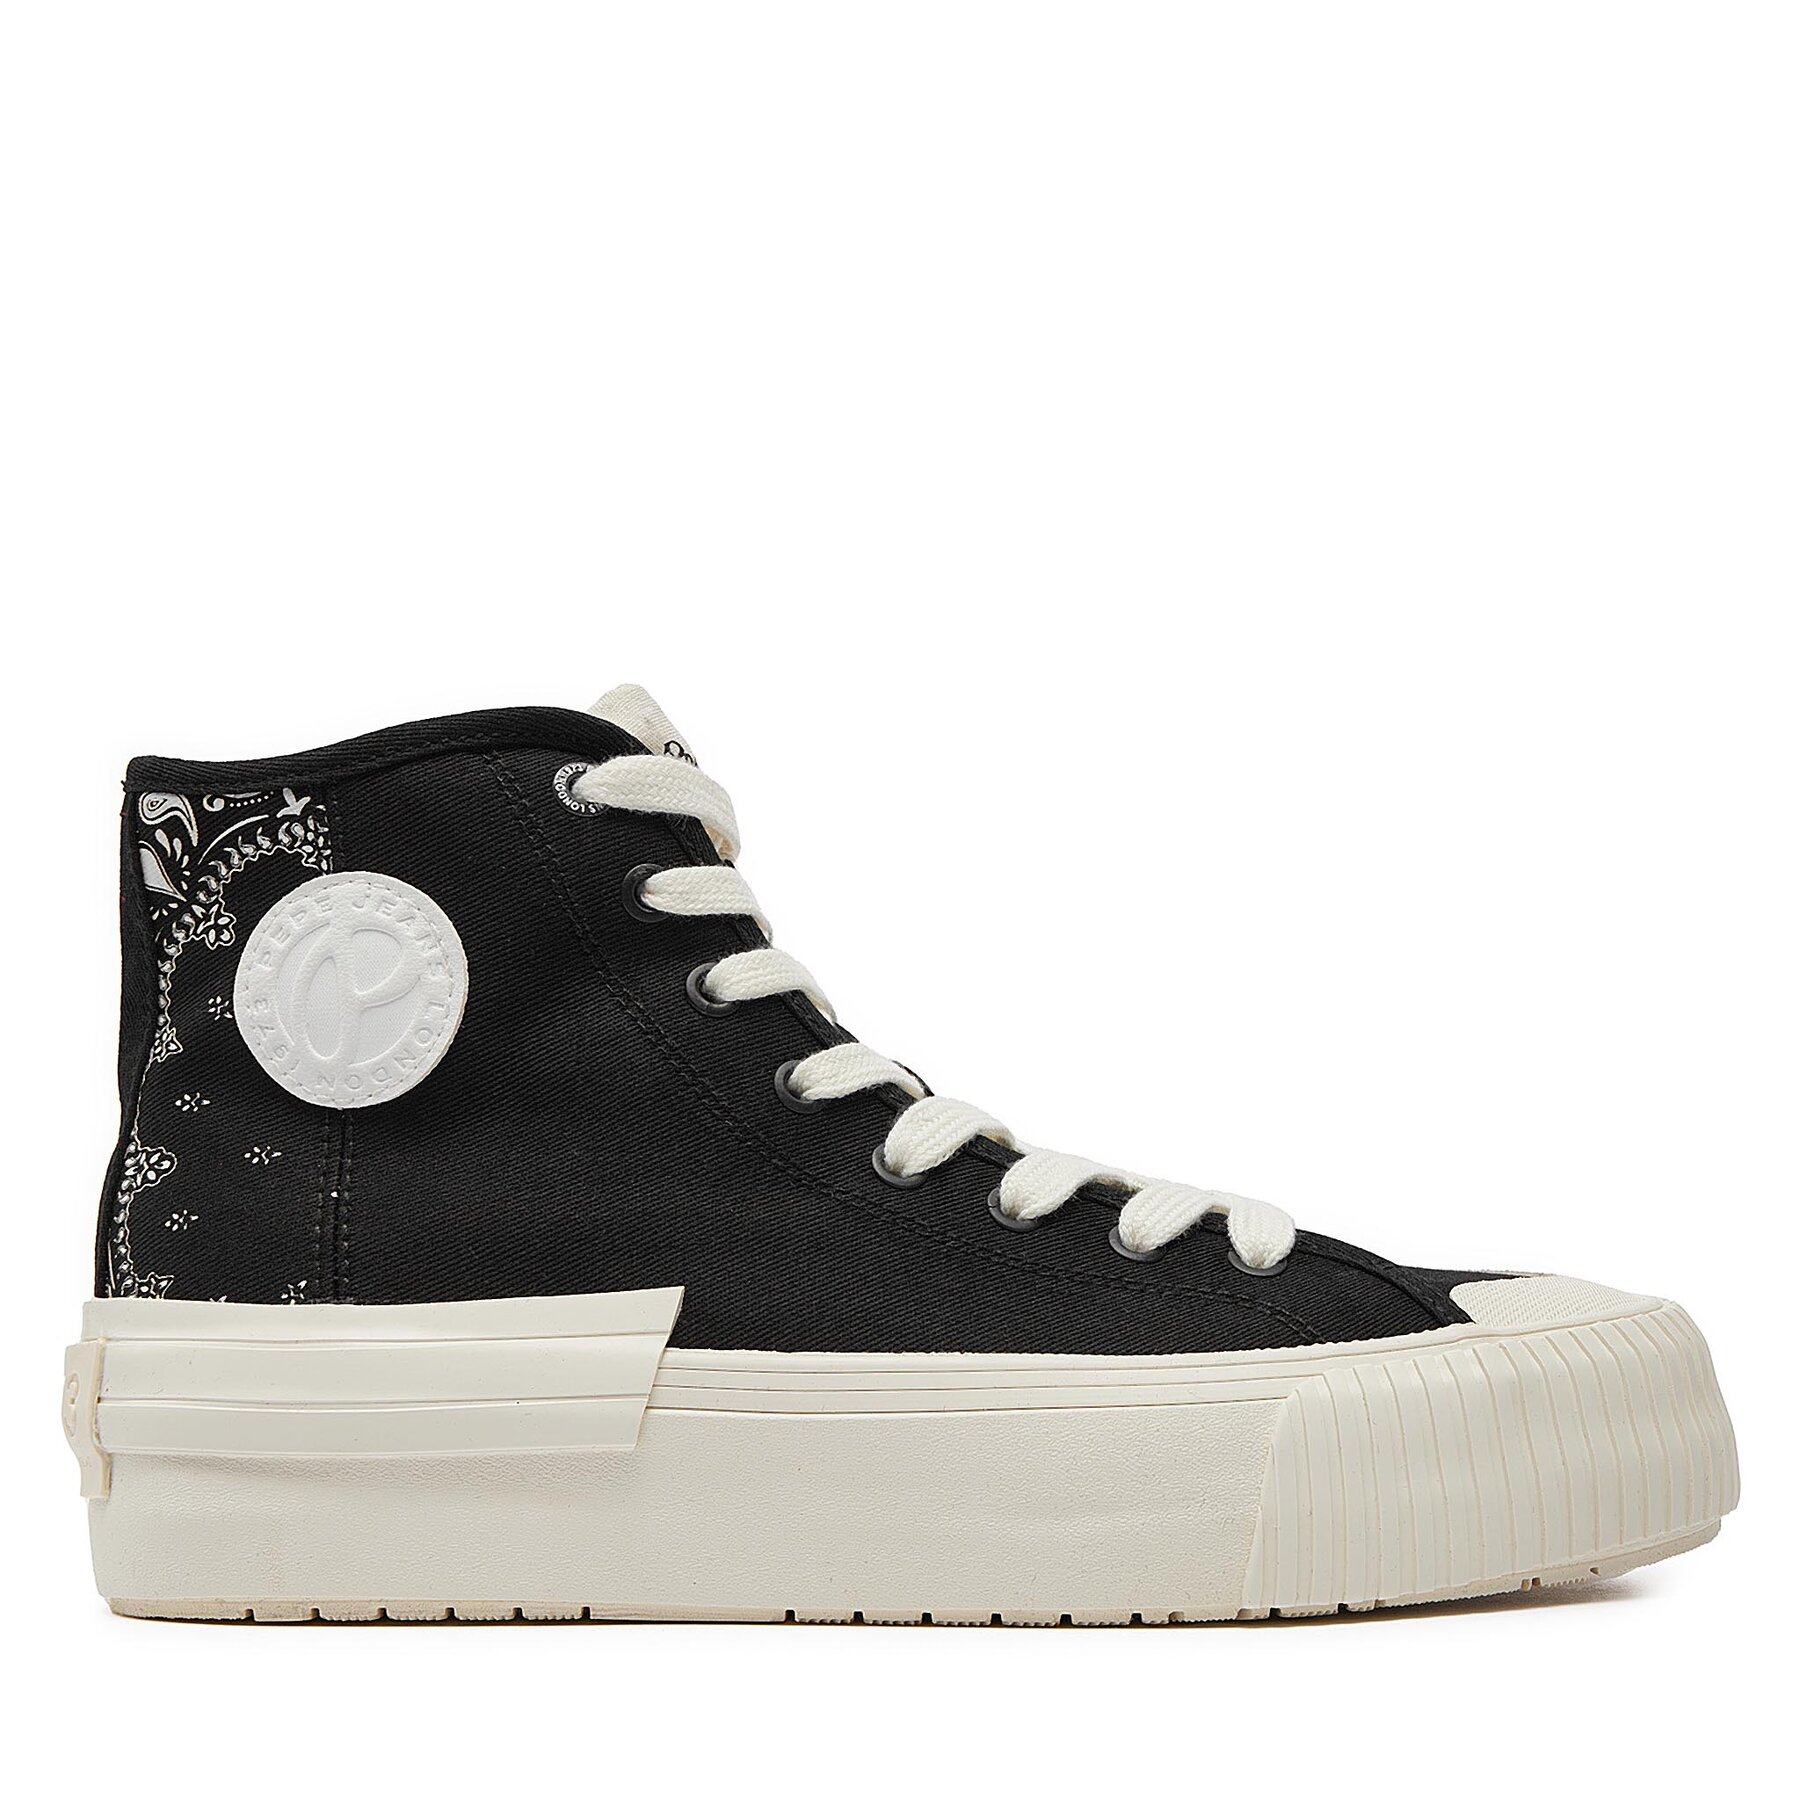 Sneakers aus Stoff Pepe Jeans Samoi Divided PLS31554 Schwarz von Pepe Jeans